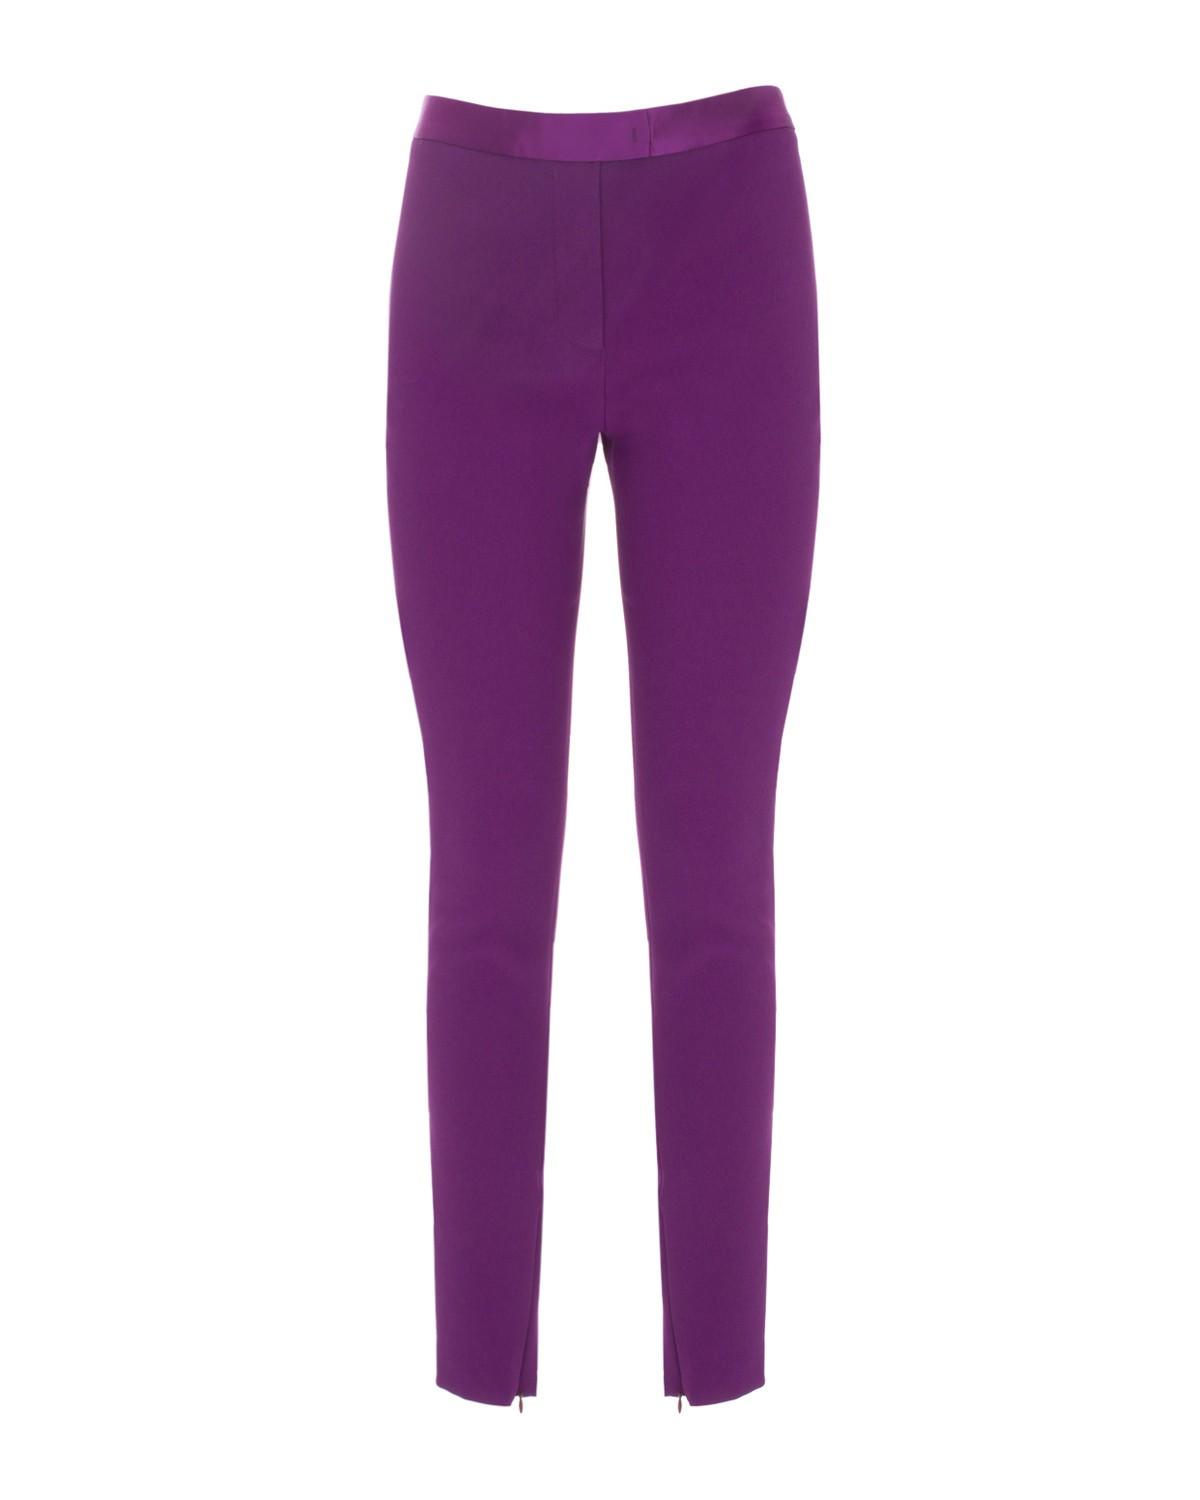 HIgh-waisted stretch pants in fuschia